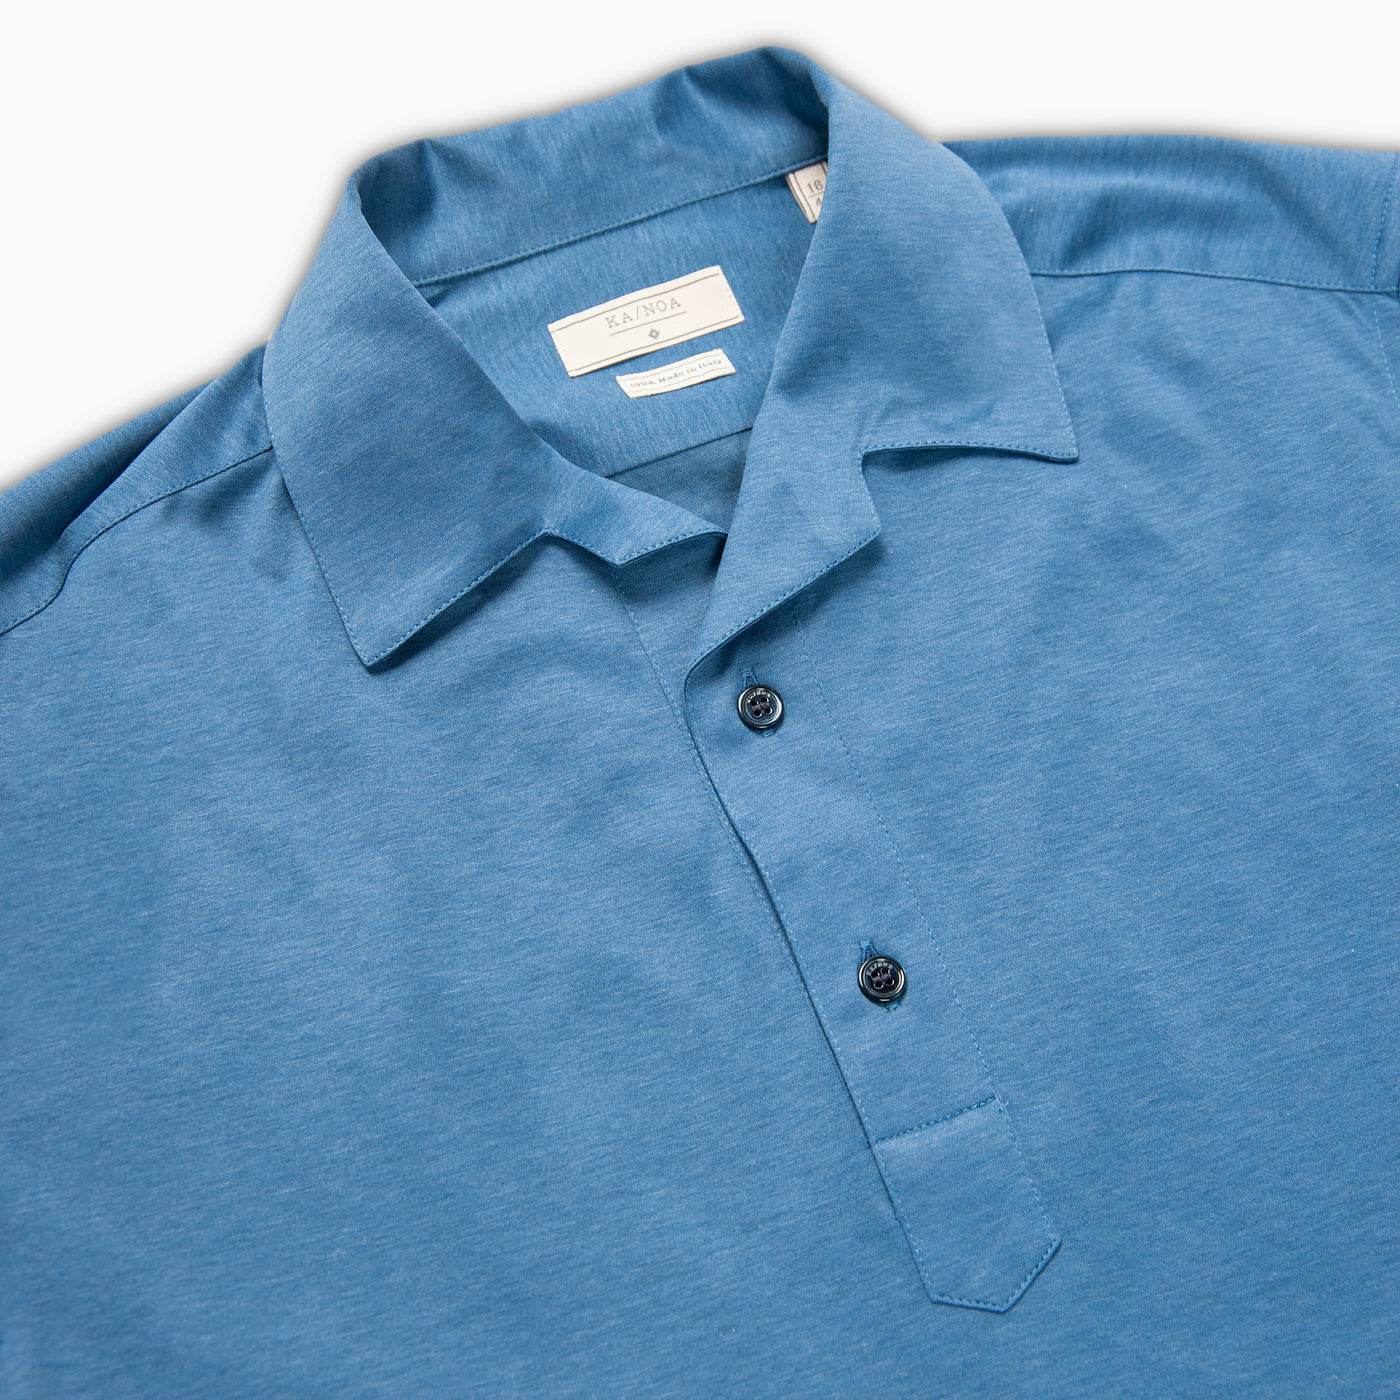 Baron shirt with polo collar in Light Jersey